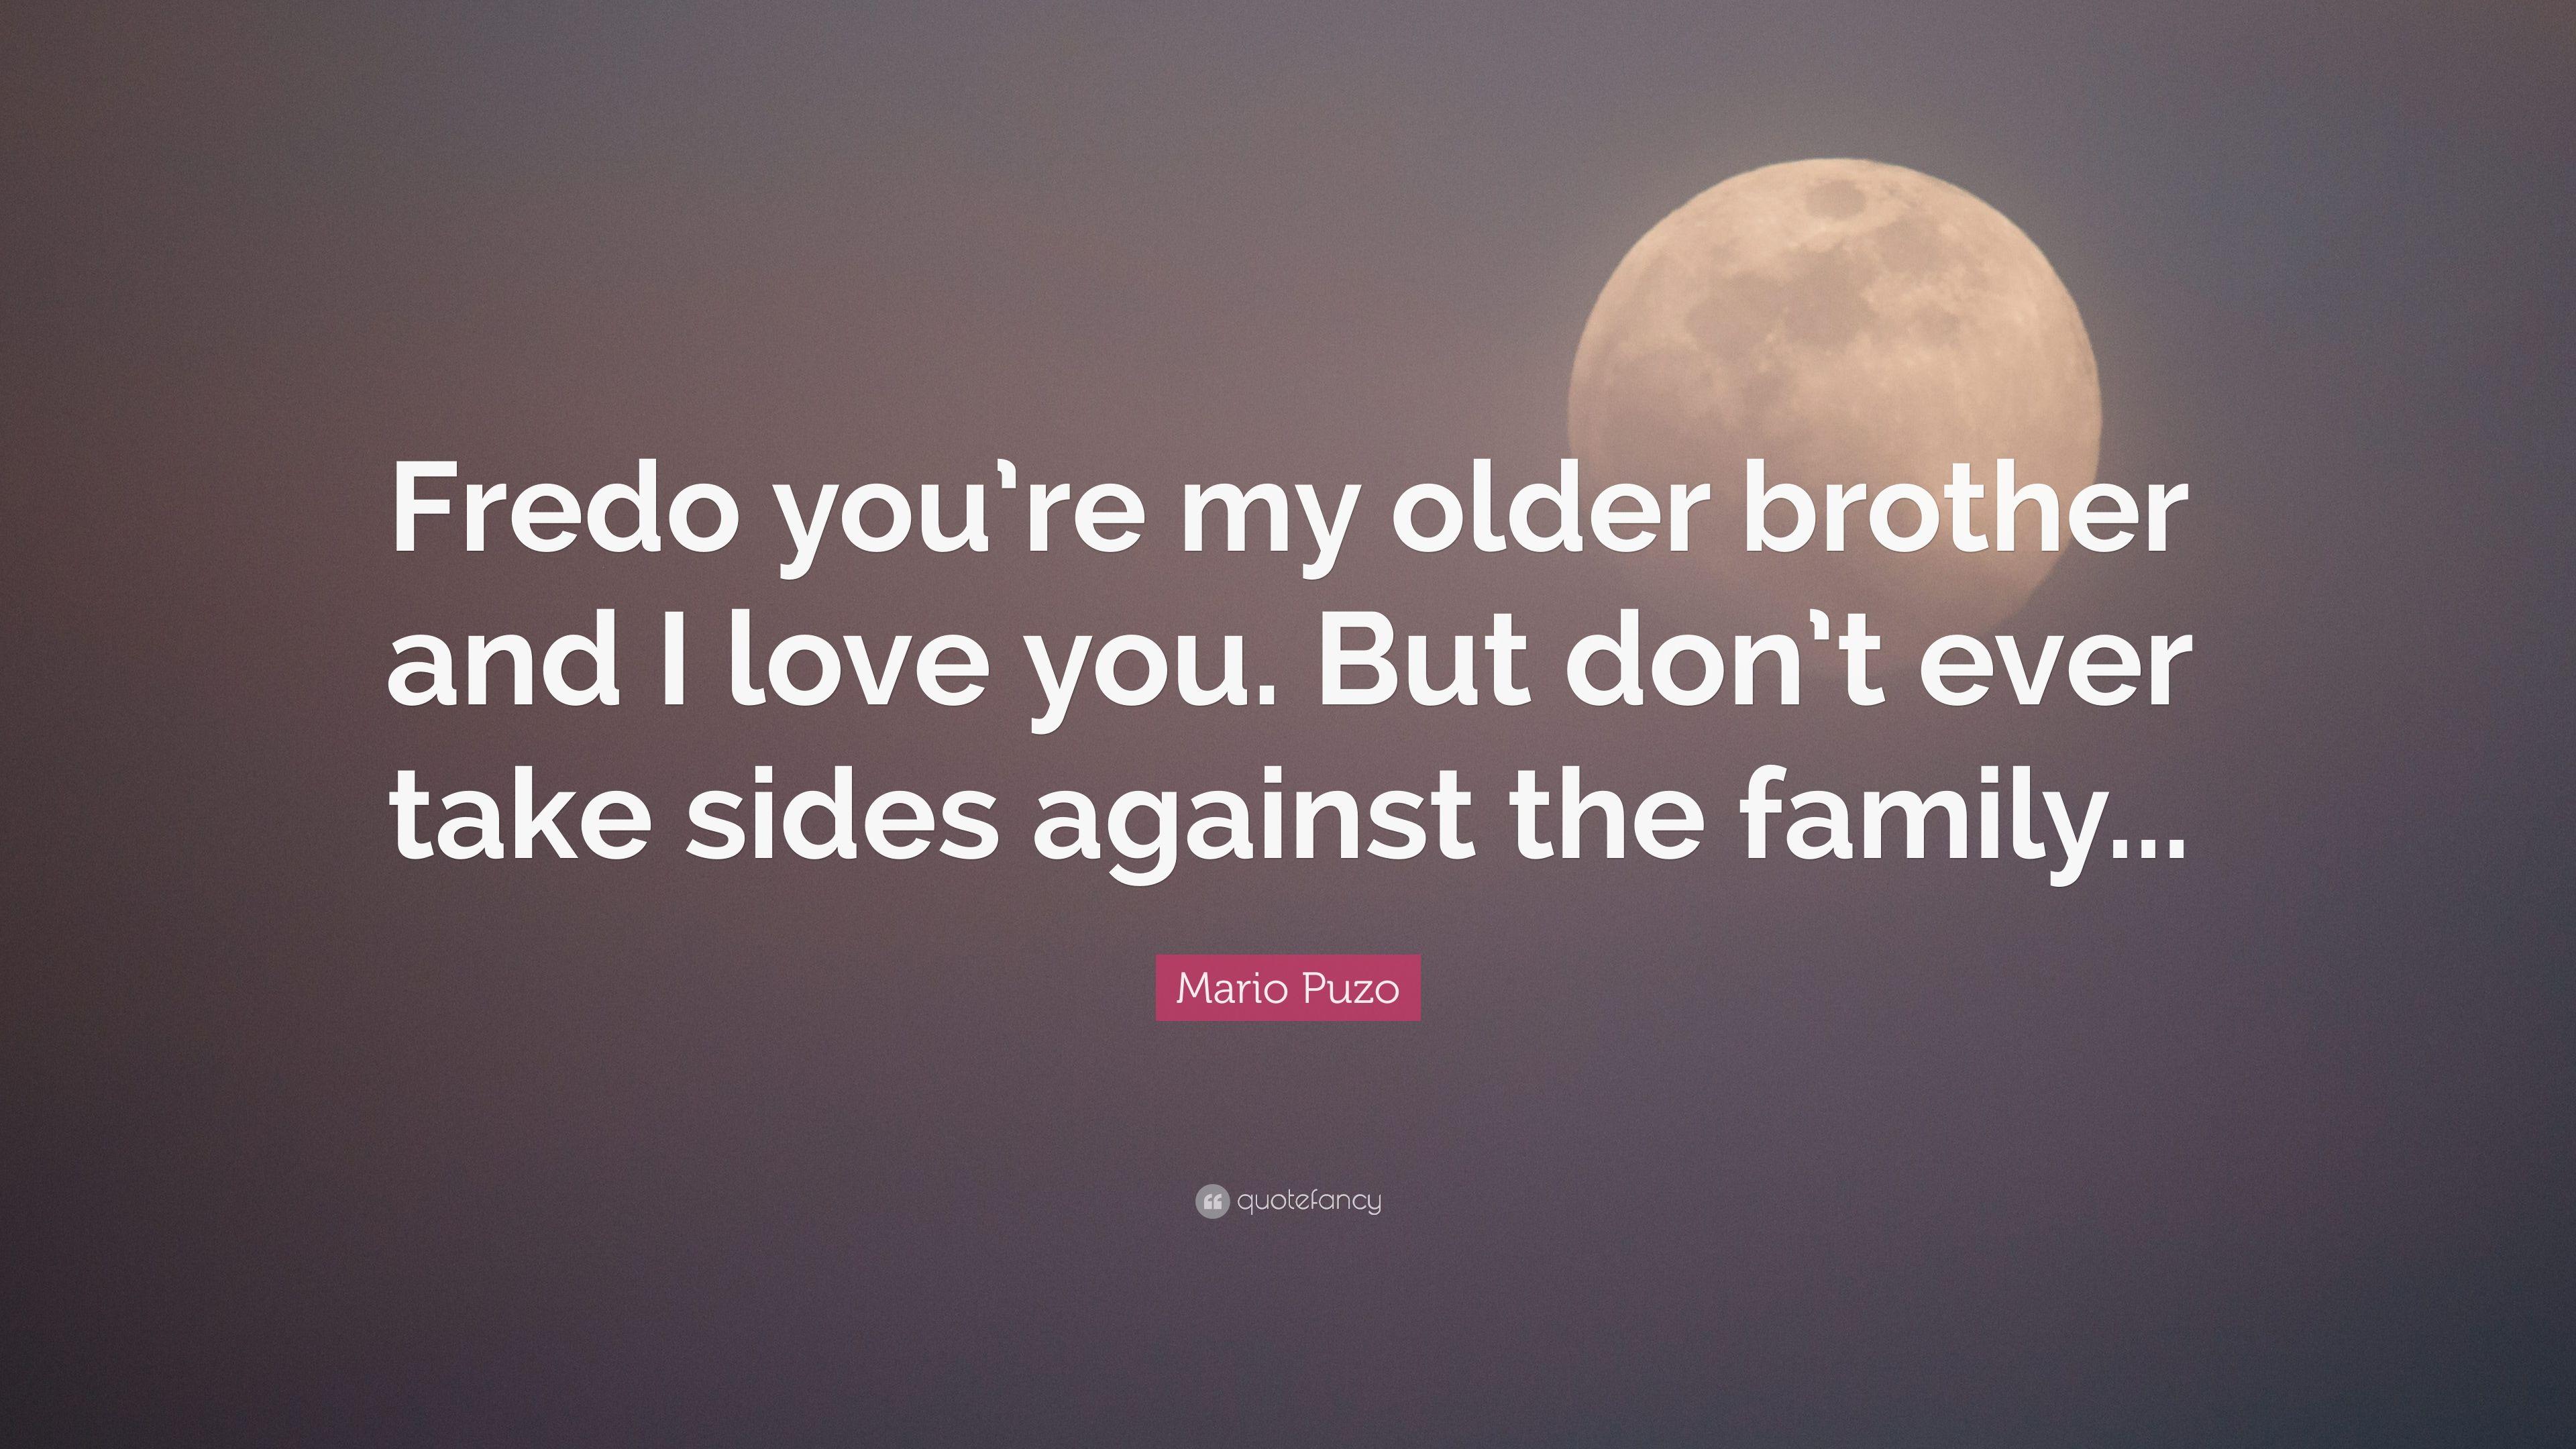 Mario Puzo Quote: “Fredo you're my older brother and I love